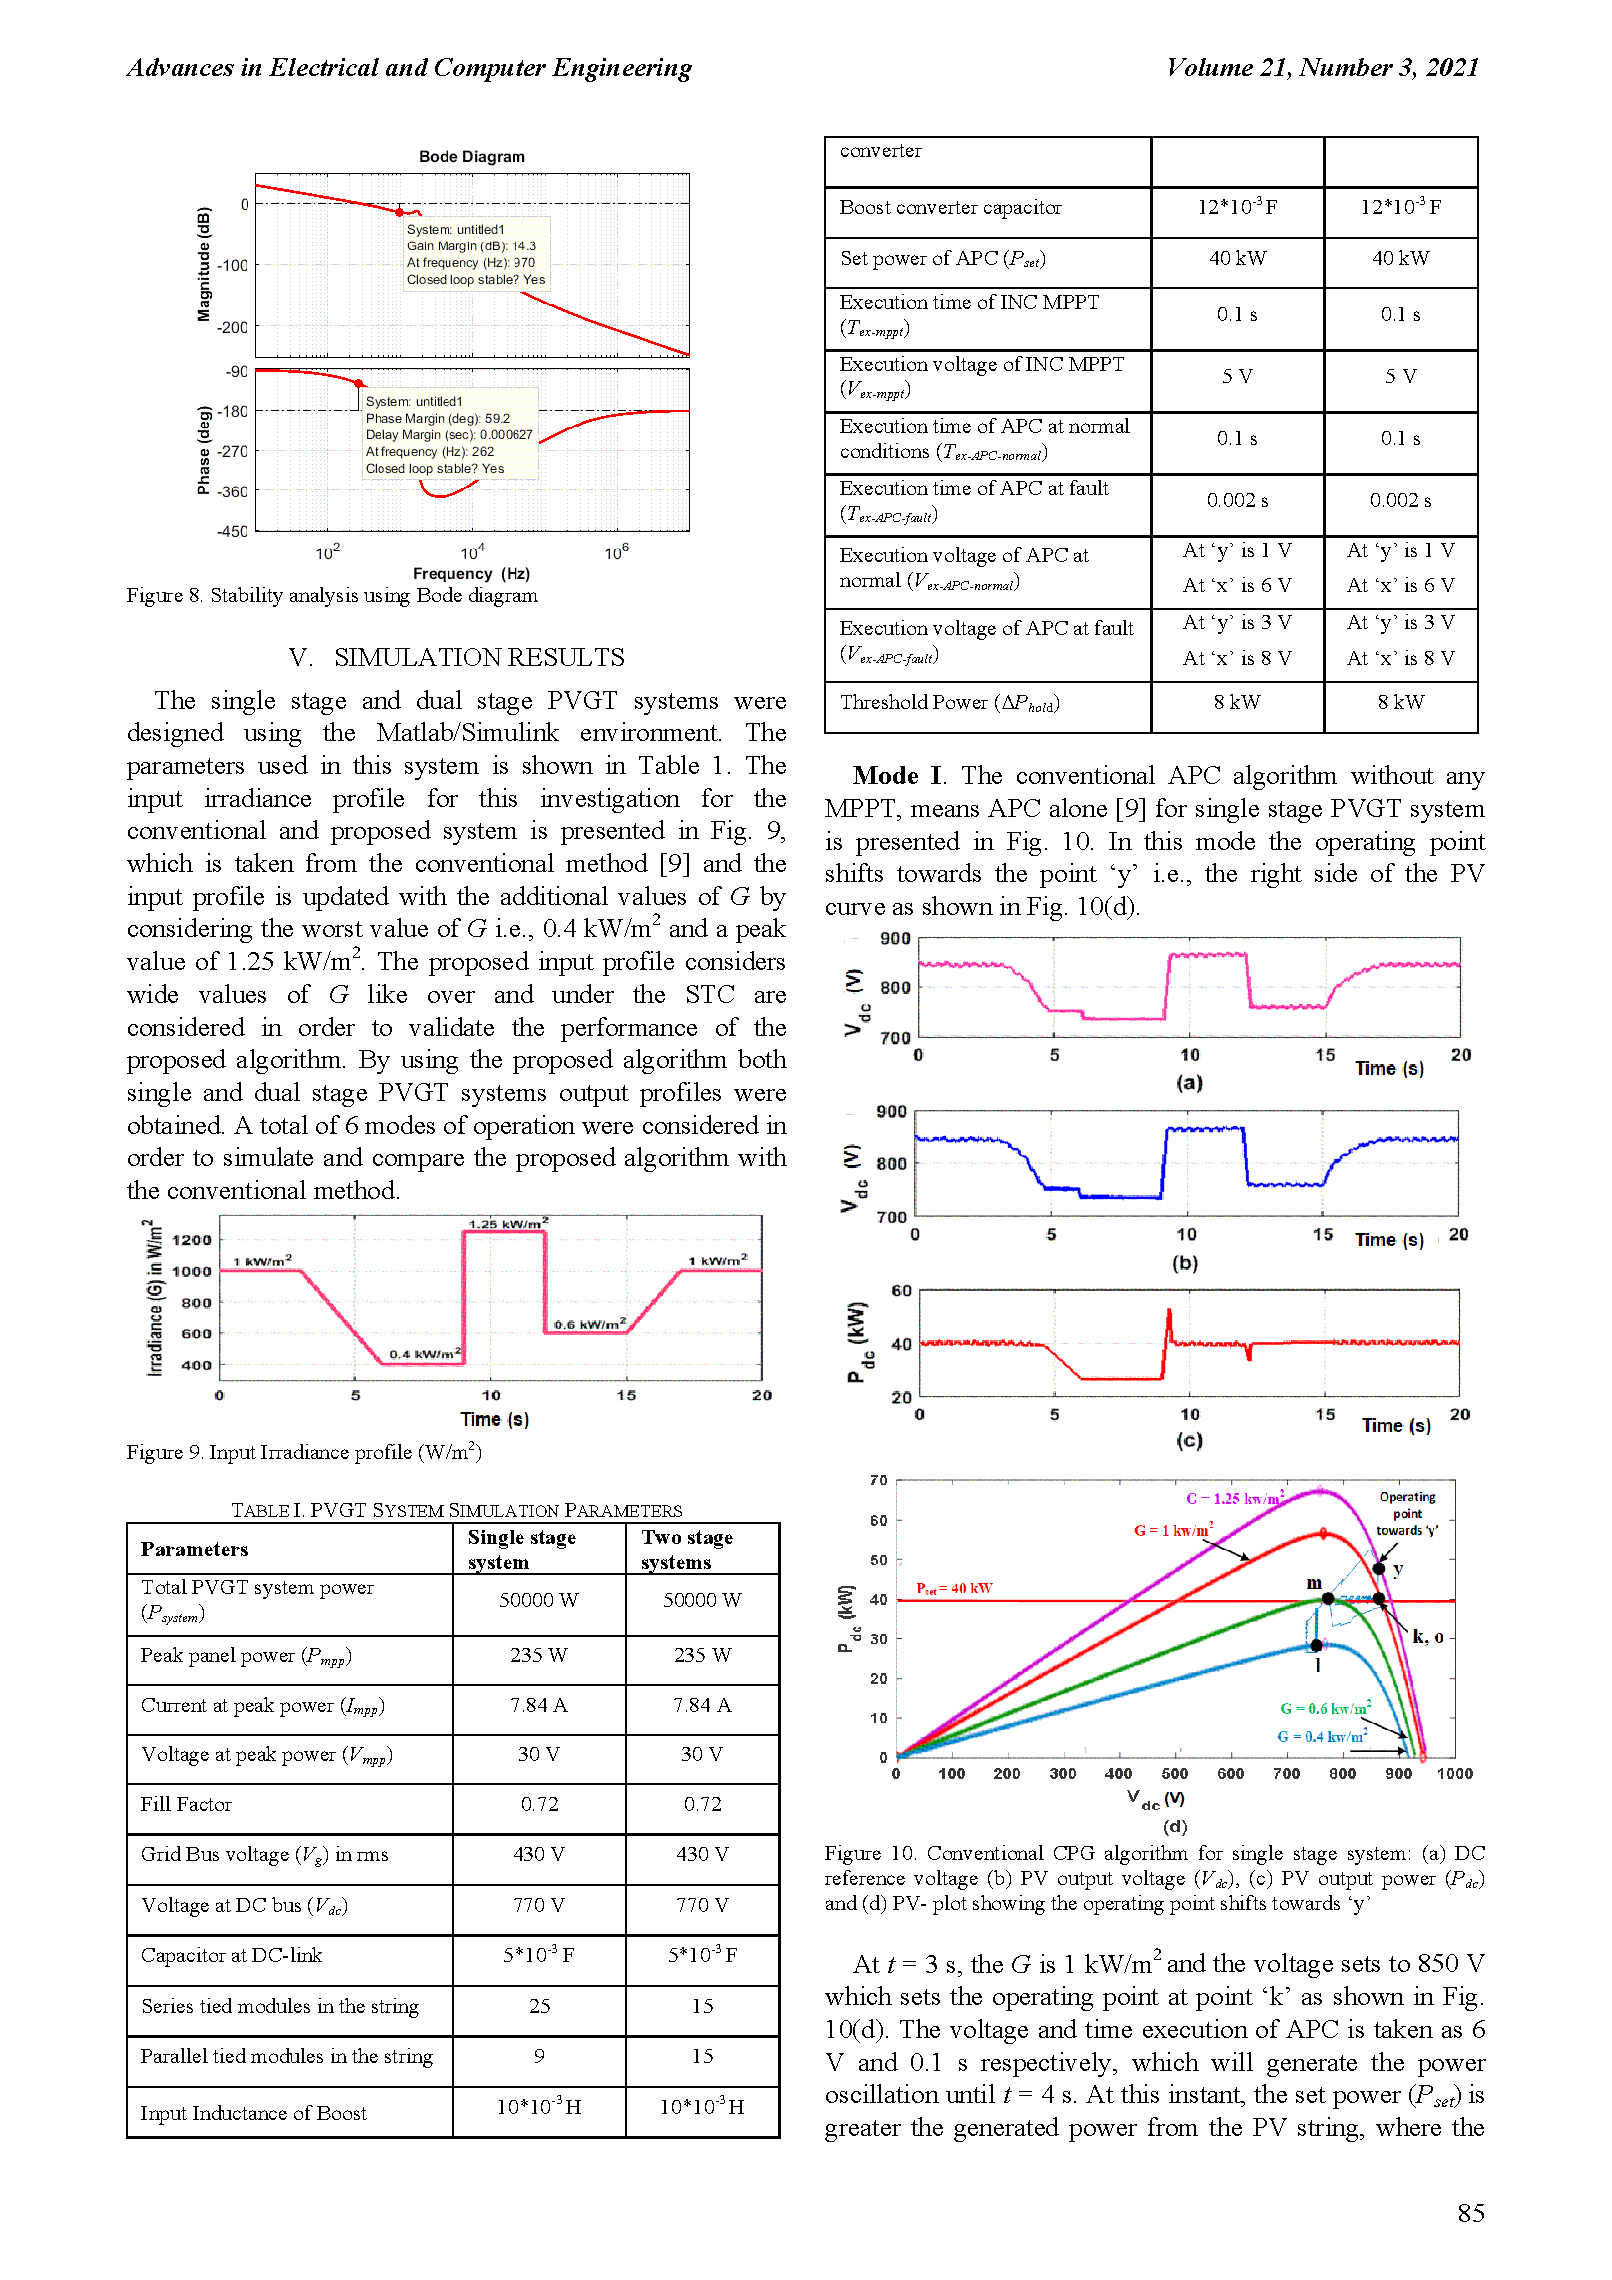 PDF Quickview for paper with DOI:10.4316/AECE.2021.03010